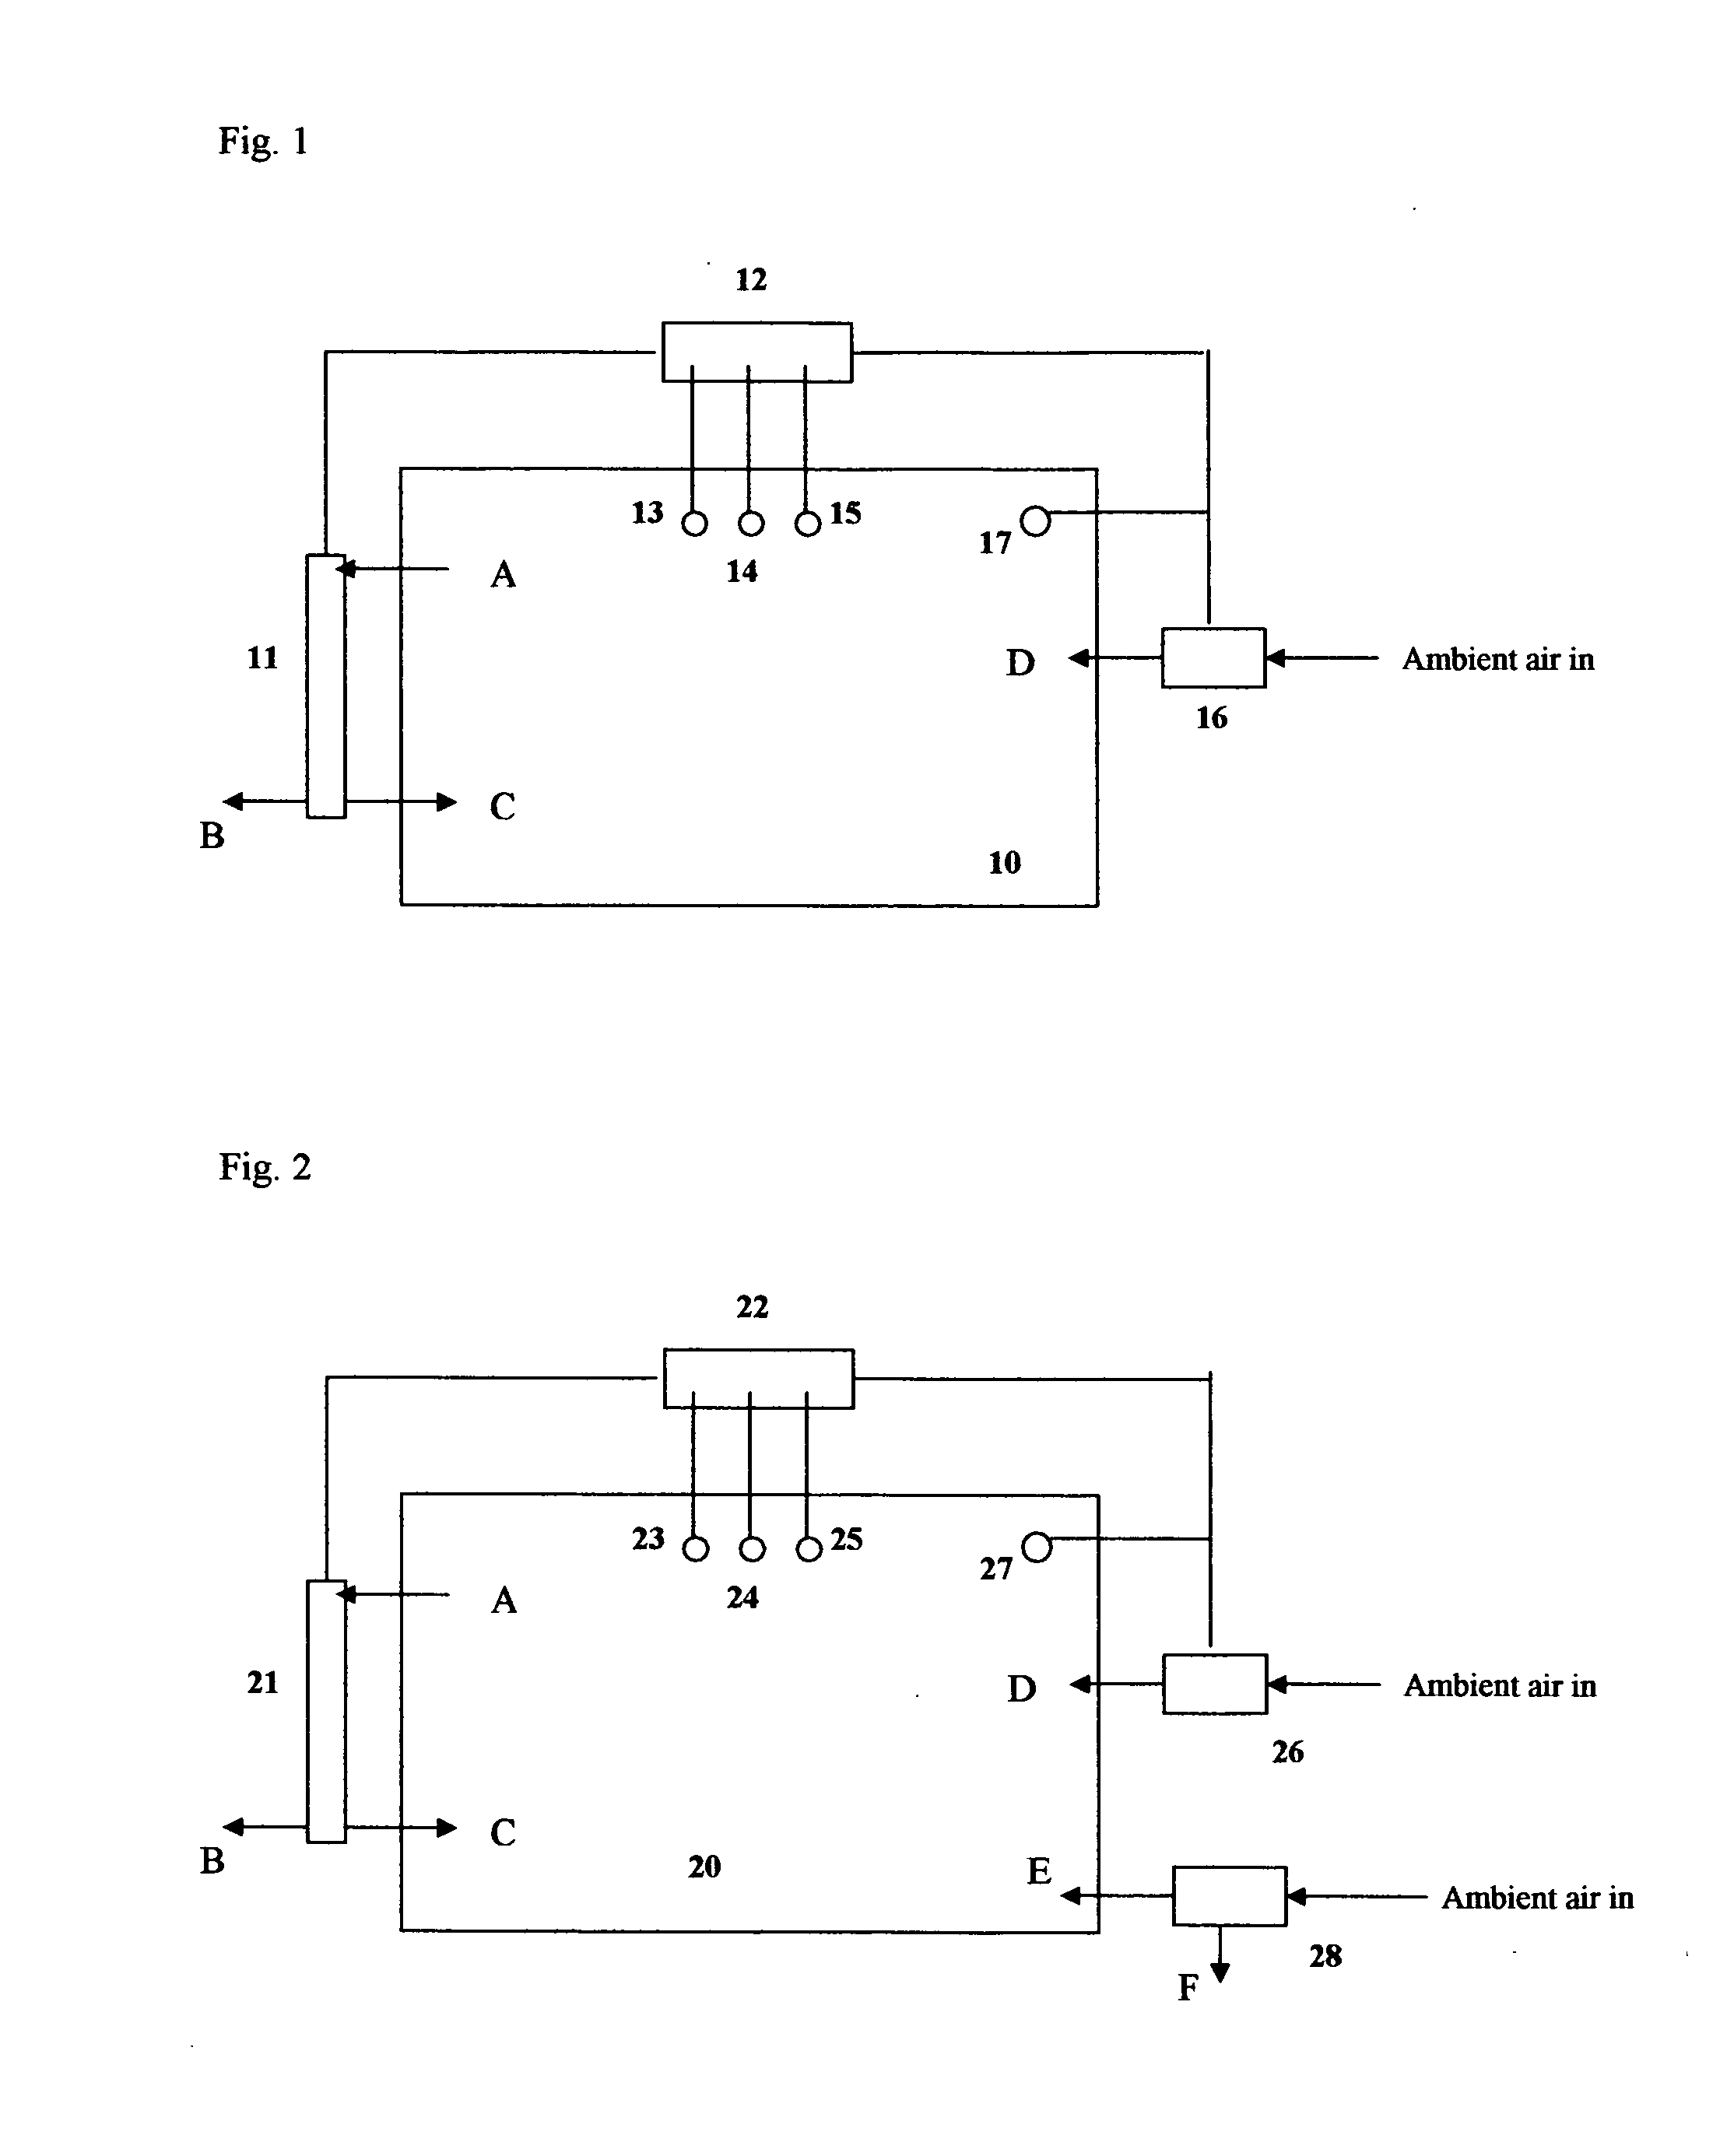 Method of producing hypoxic environments in occupied compartments with simultaneous removal of excessive carbon dioxide and humidity